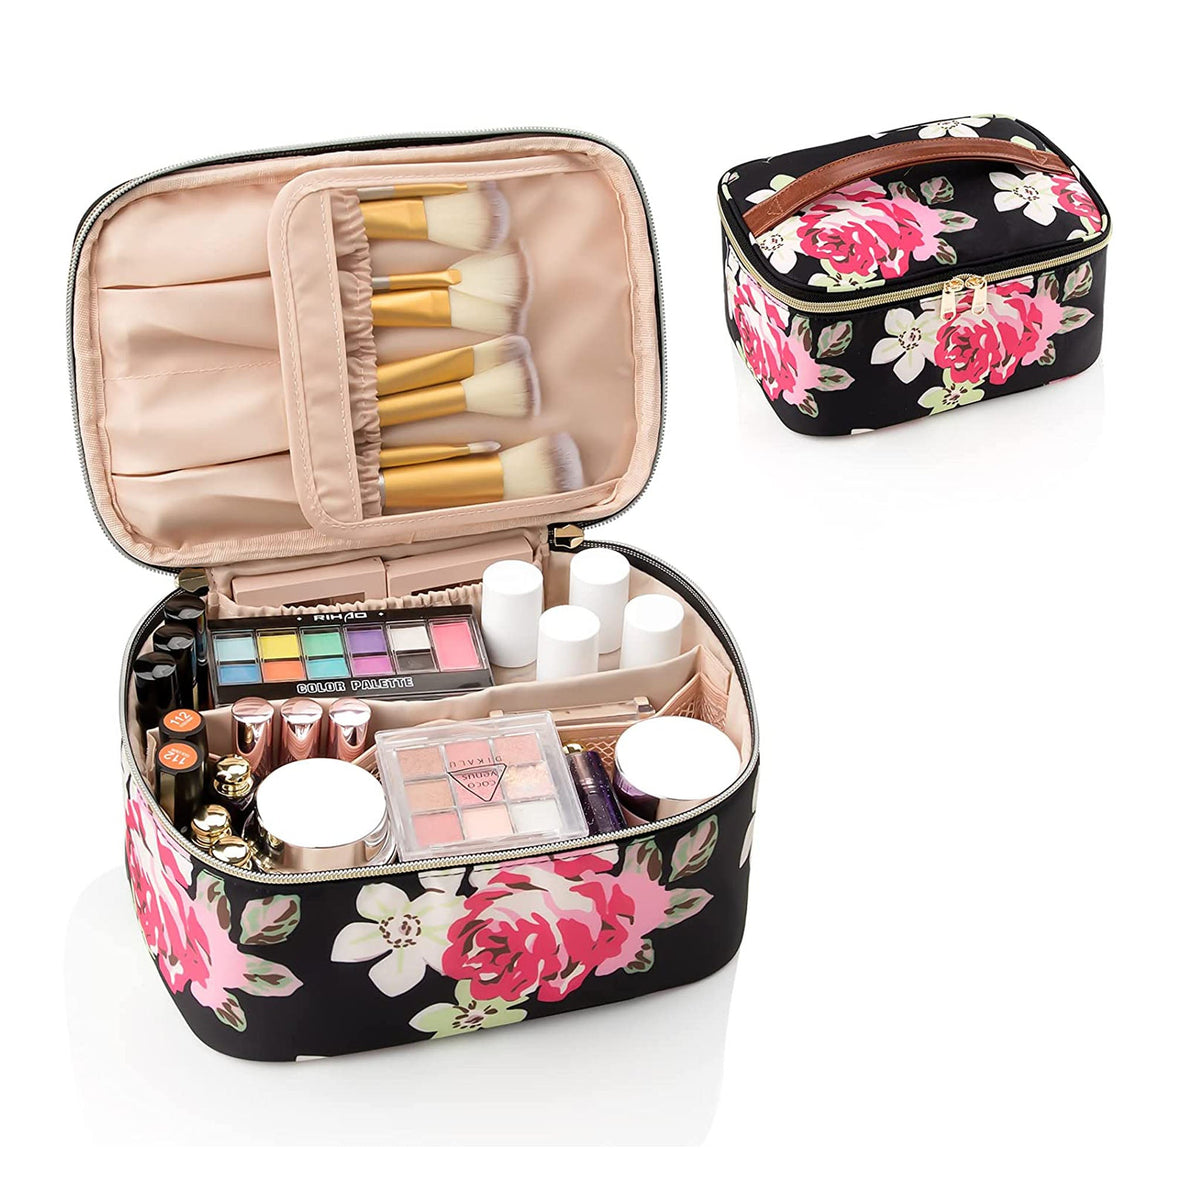 Relavel Makeup Bag, Makeup Organizer Large Capacity Travel Cosmetic Bag for  Women and Girls, Dual Layer Makeup Brush Case Toiletry Storage and Holder